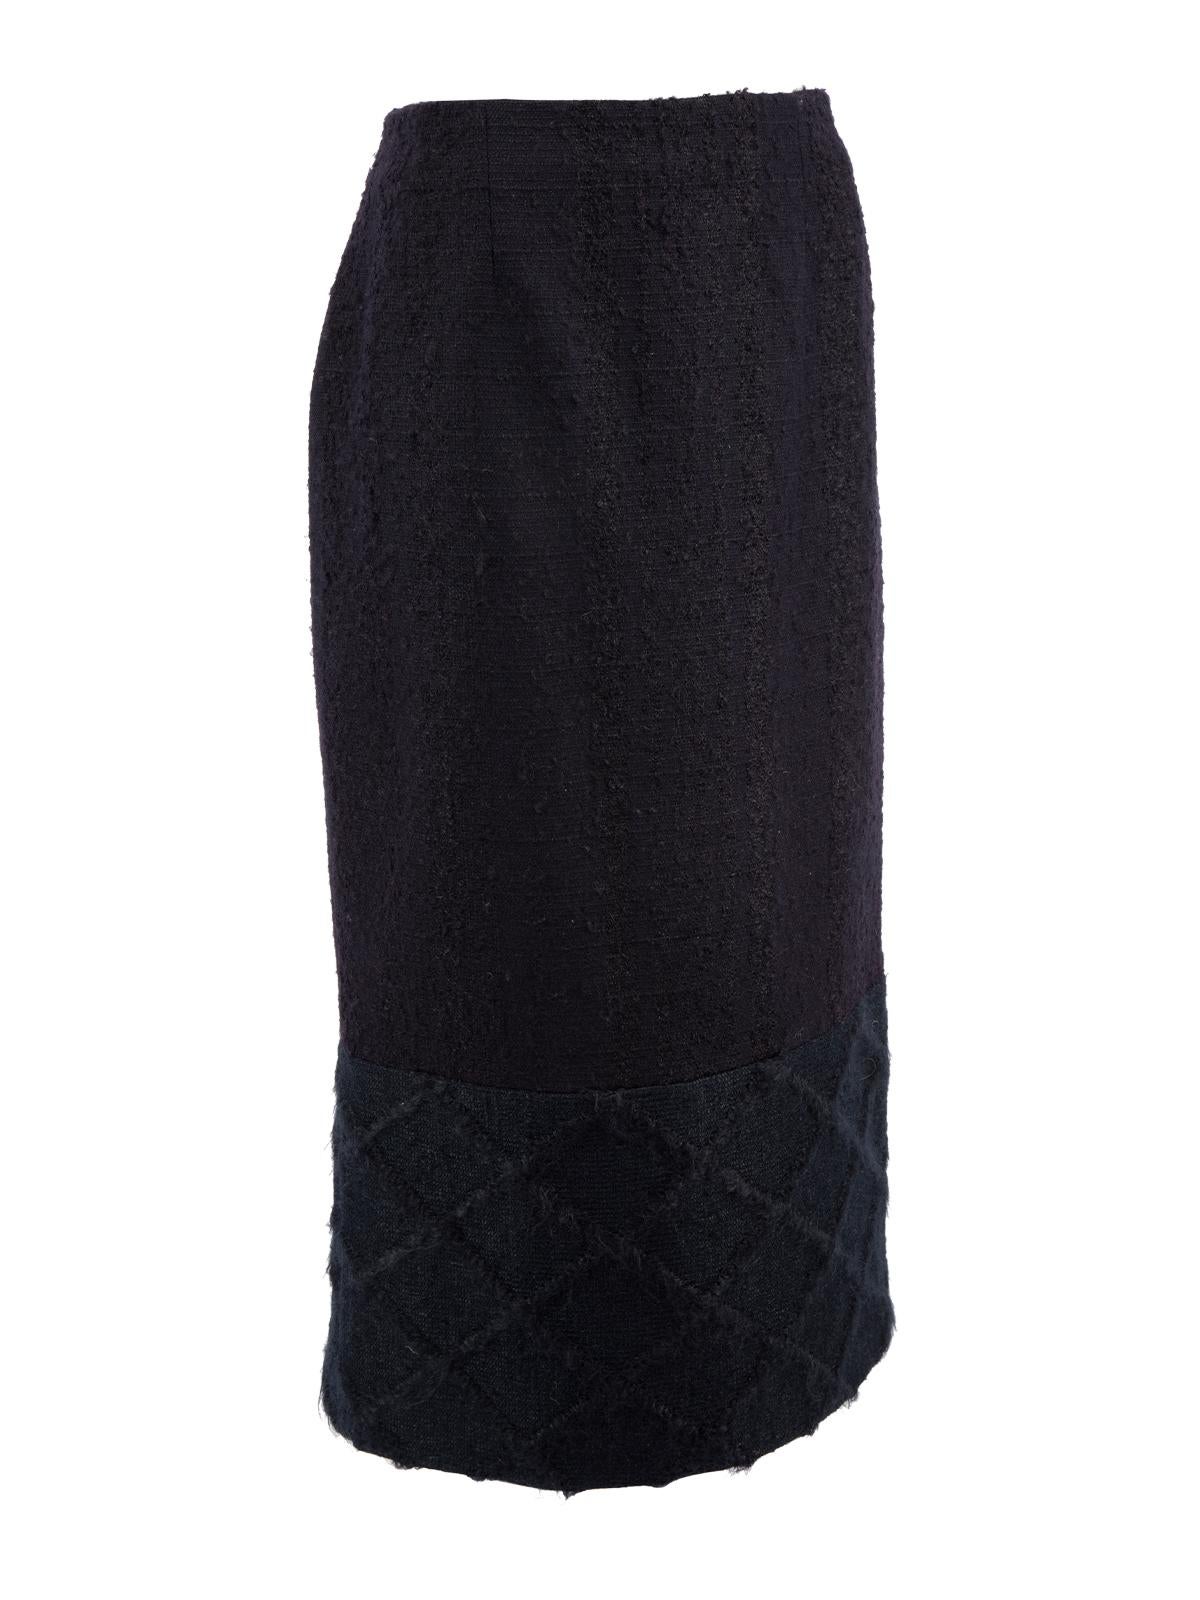 CONDITION is Very good. Minimal wear to skirt is evident. Overall wear to outer fabric, where pilling can be seen on this used Christian Dior designer resale item.   Details  Dark Navy Wool Tight fit Midi length Criss-cross pattern on hemline